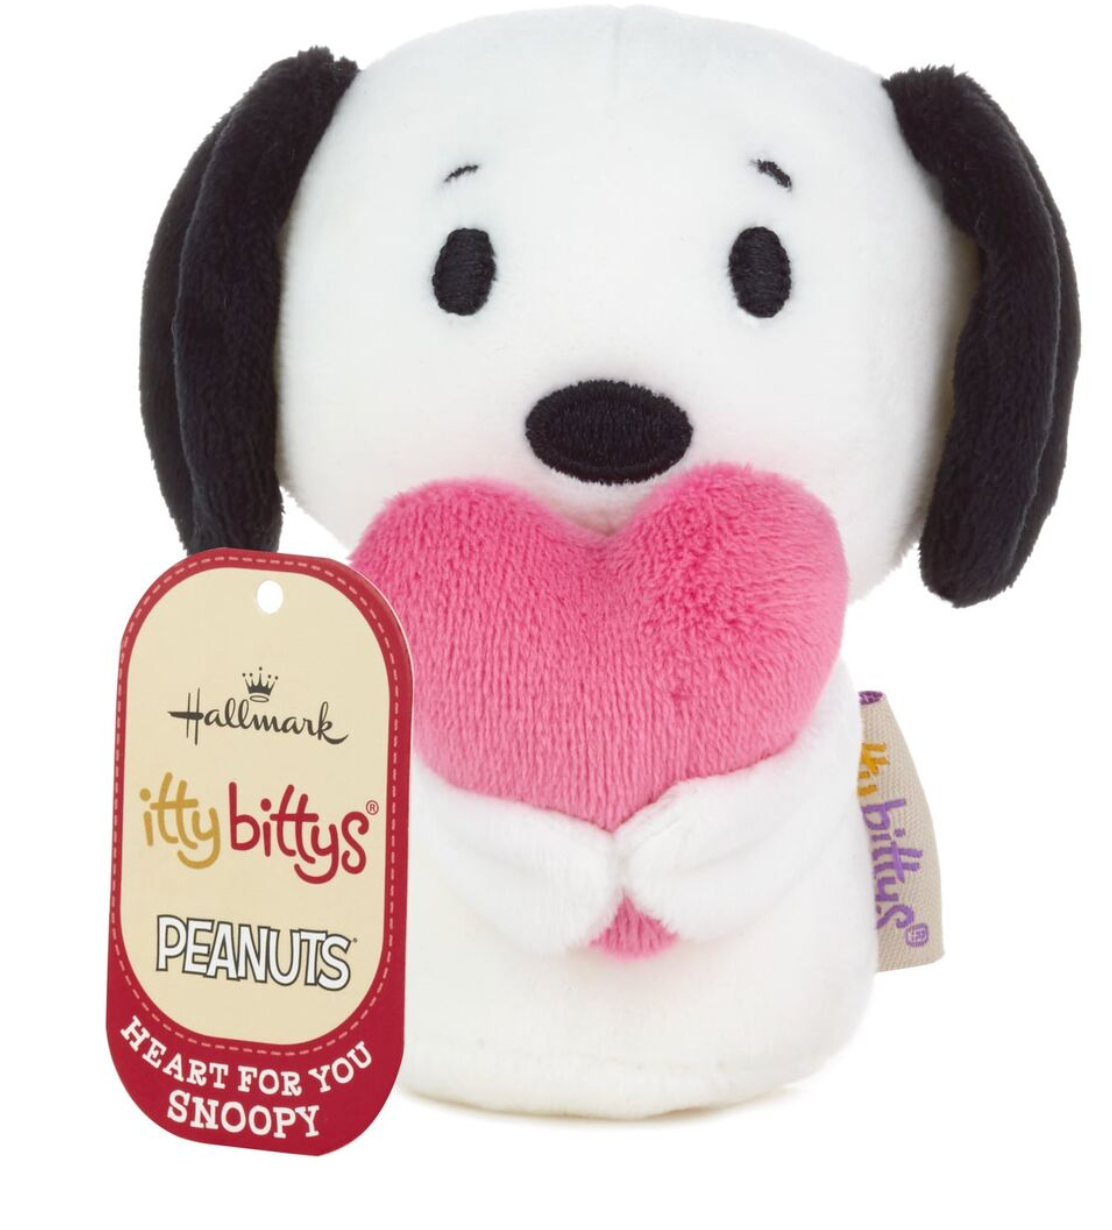 Hallmark Valentine Heart for You Snoopy Itty Bittys Plush New with Tag